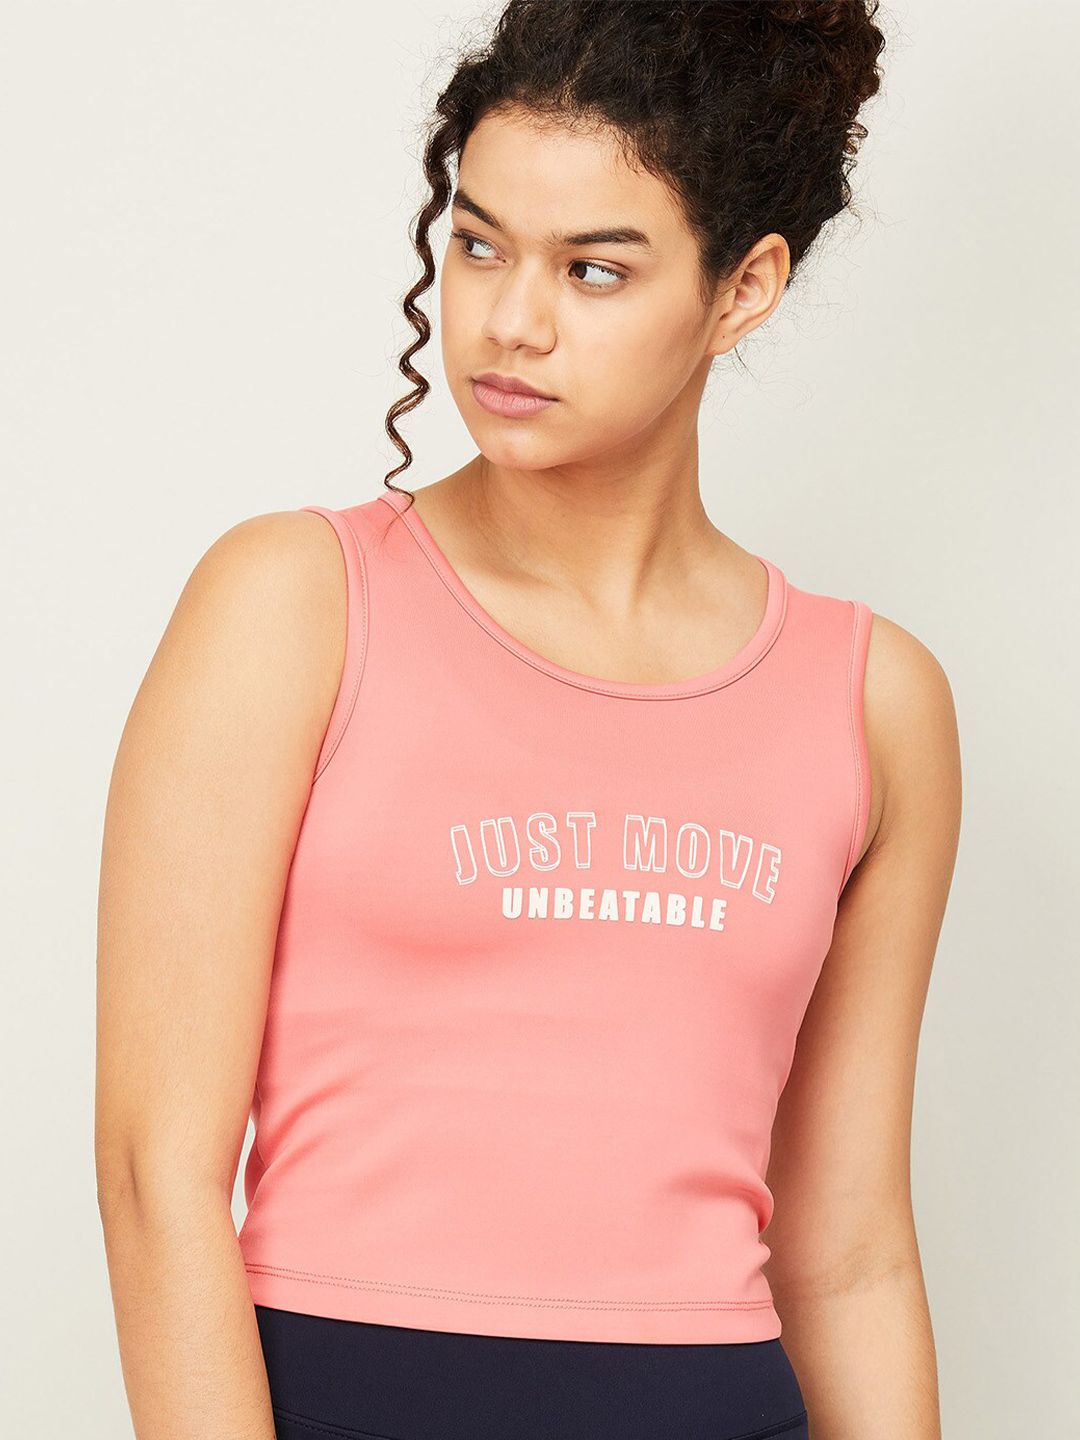 Kappa Women Coral Typography Printed T-shirt Price in India